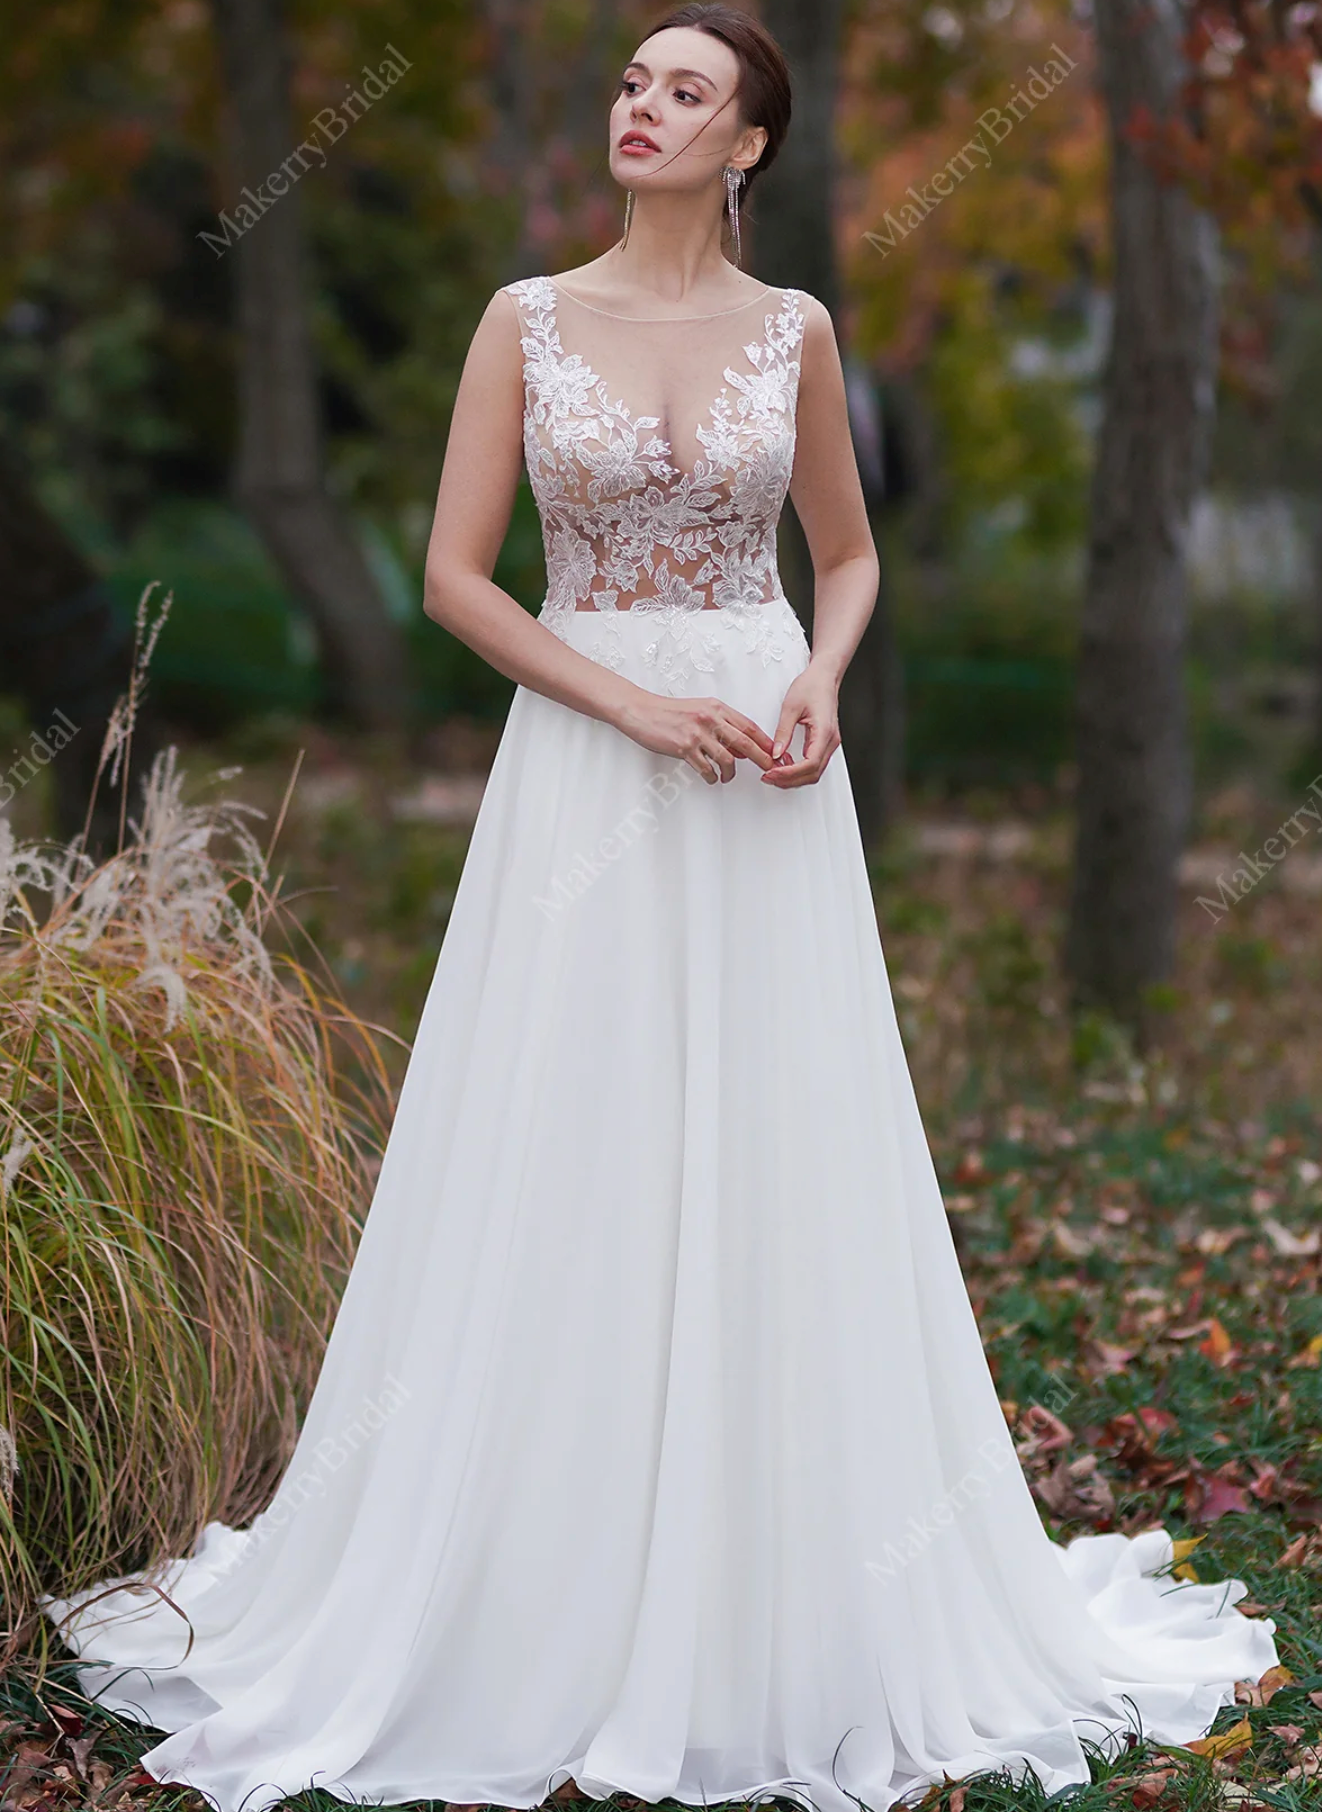 V Neck Sheer Lace & Chiffon Outdoor Summer Wedding Gown - VQ